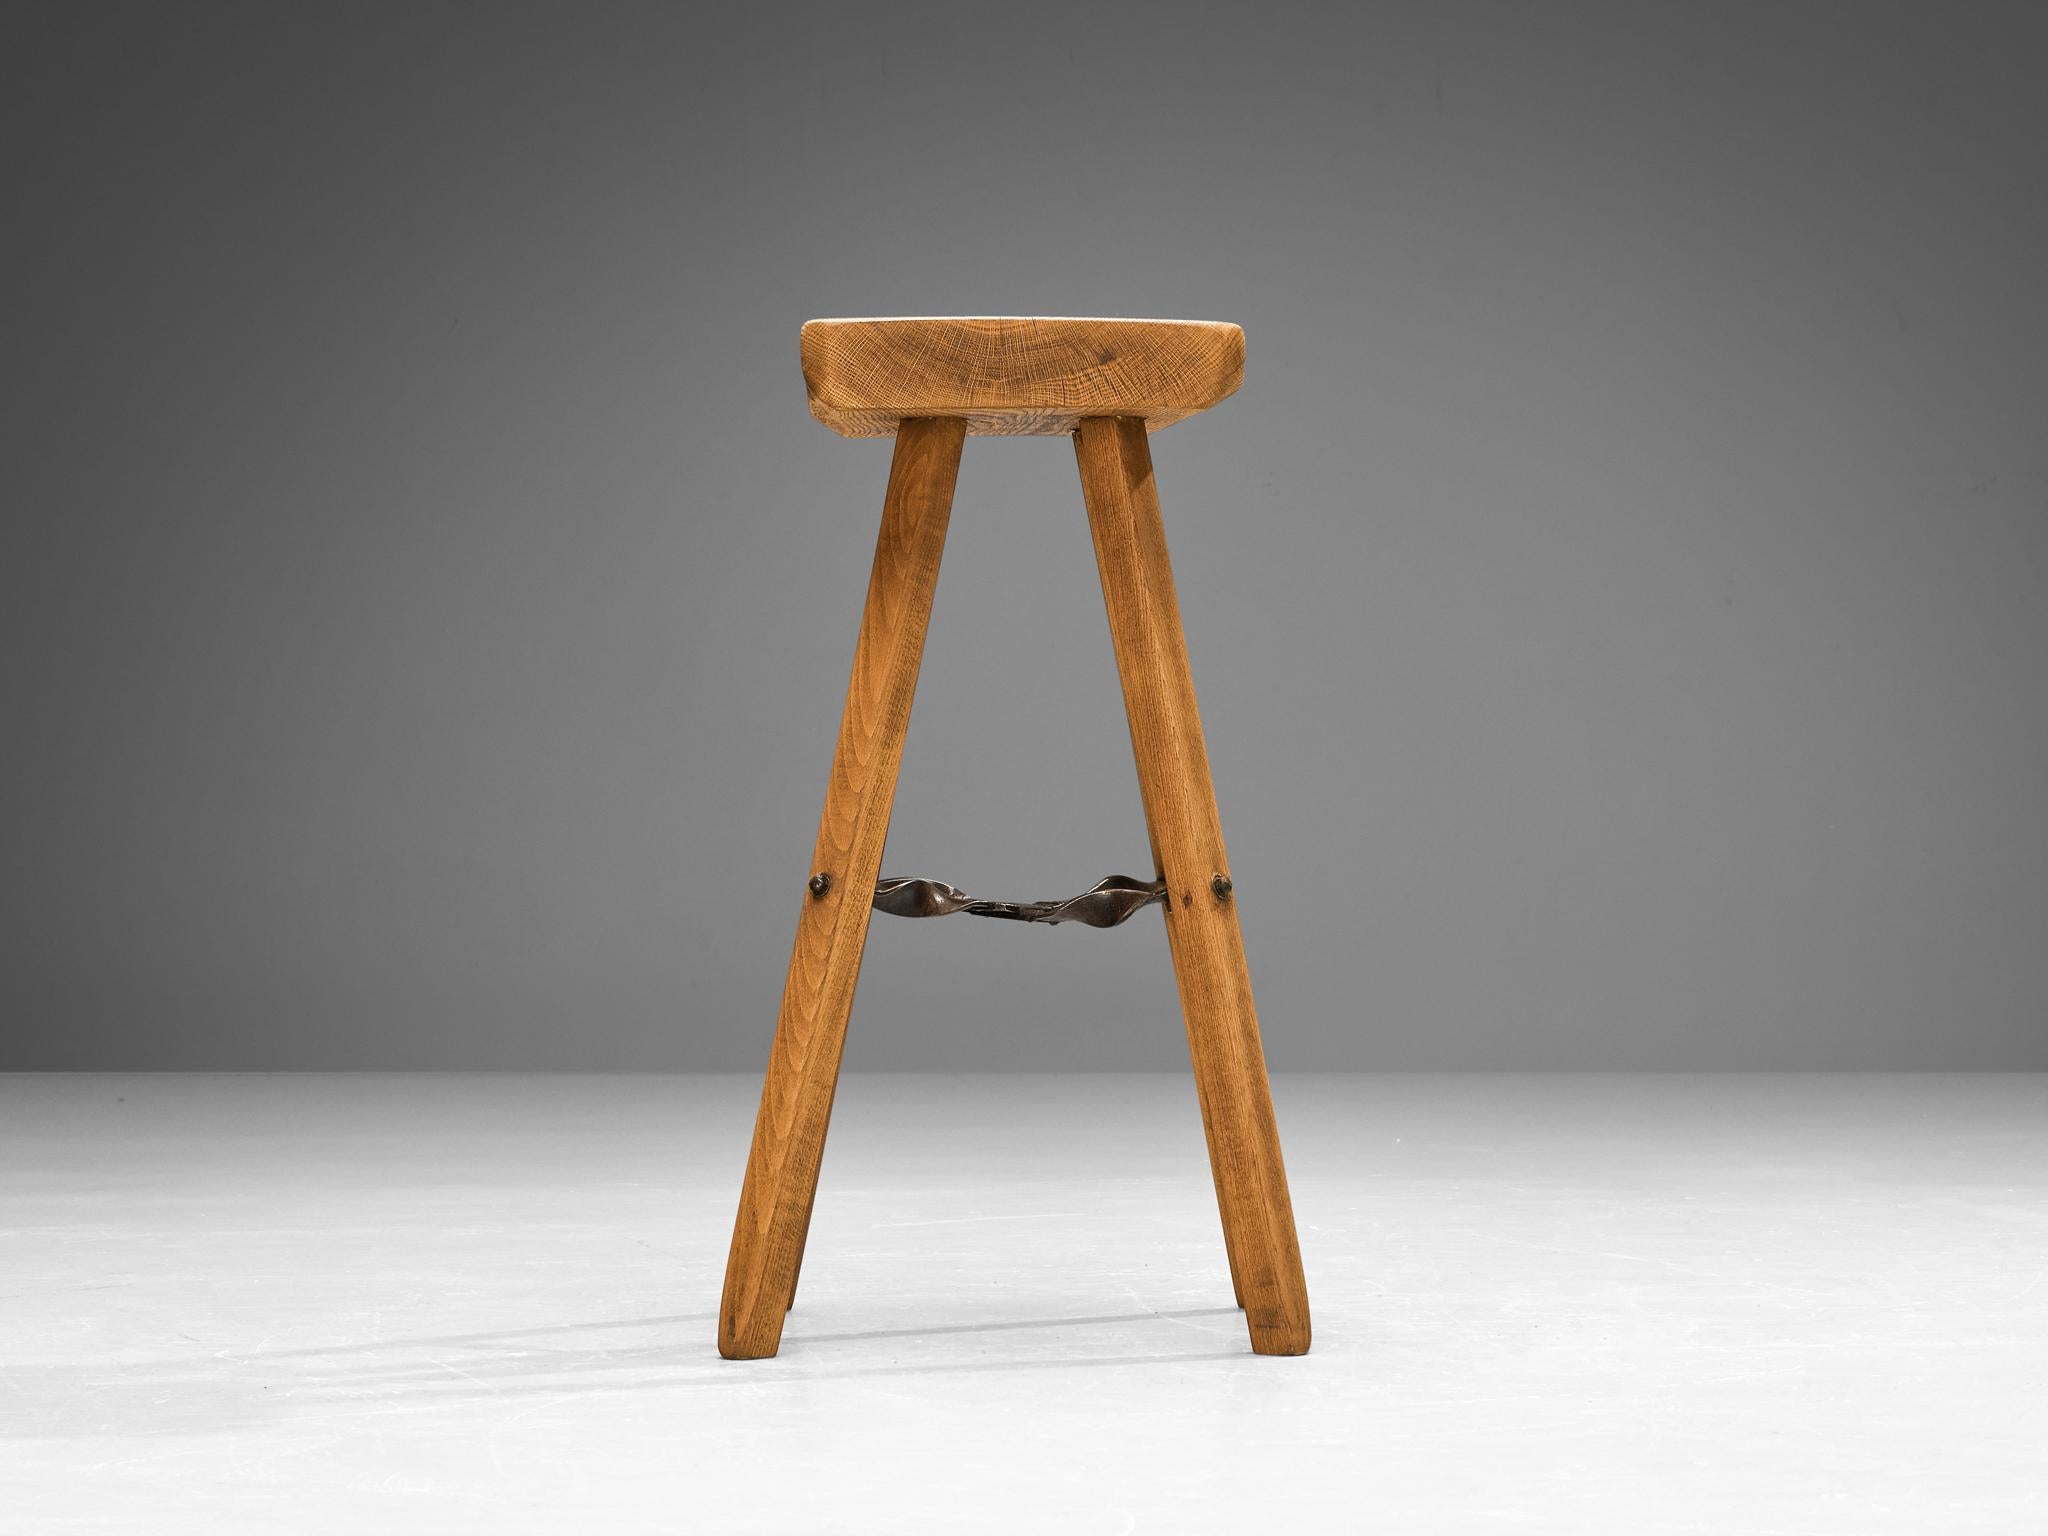 Wrought Iron Mobichalet Brutalist Bar Stools in Blond Pine Wood and Iron For Sale